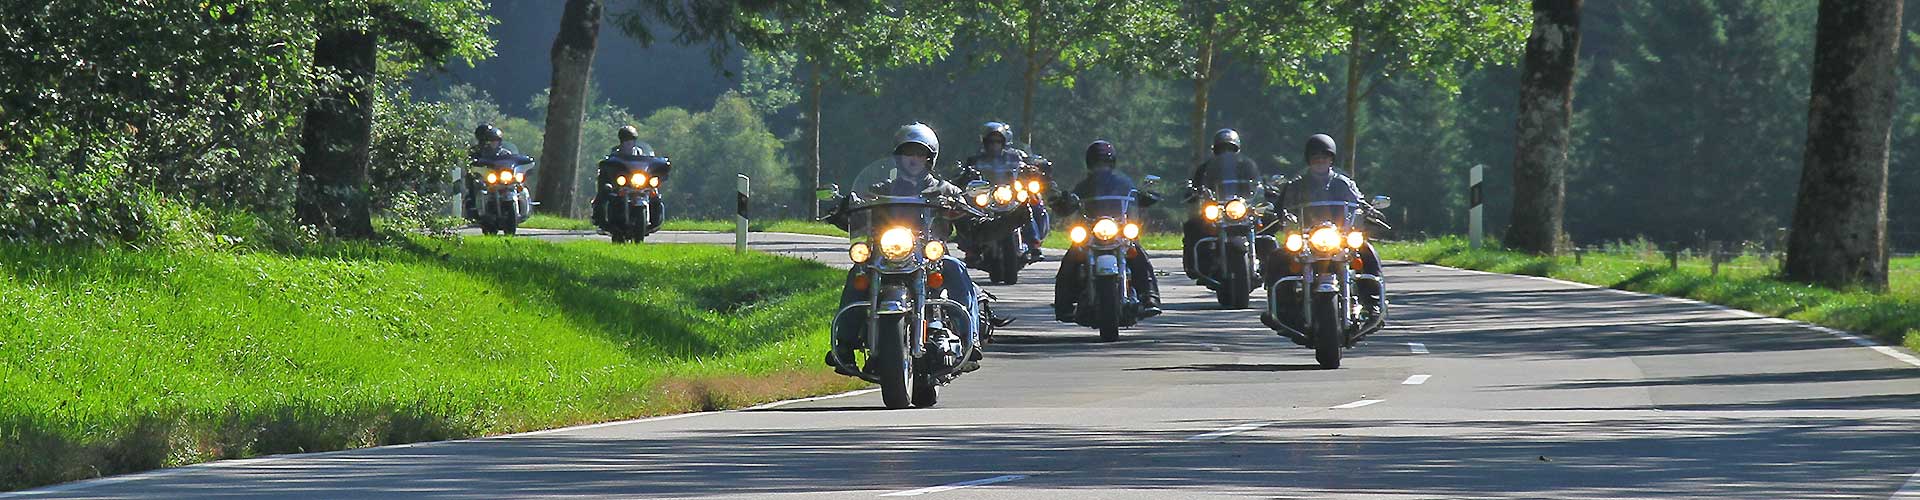 Reuthers Motorcycle Tours on Harley-Davidson